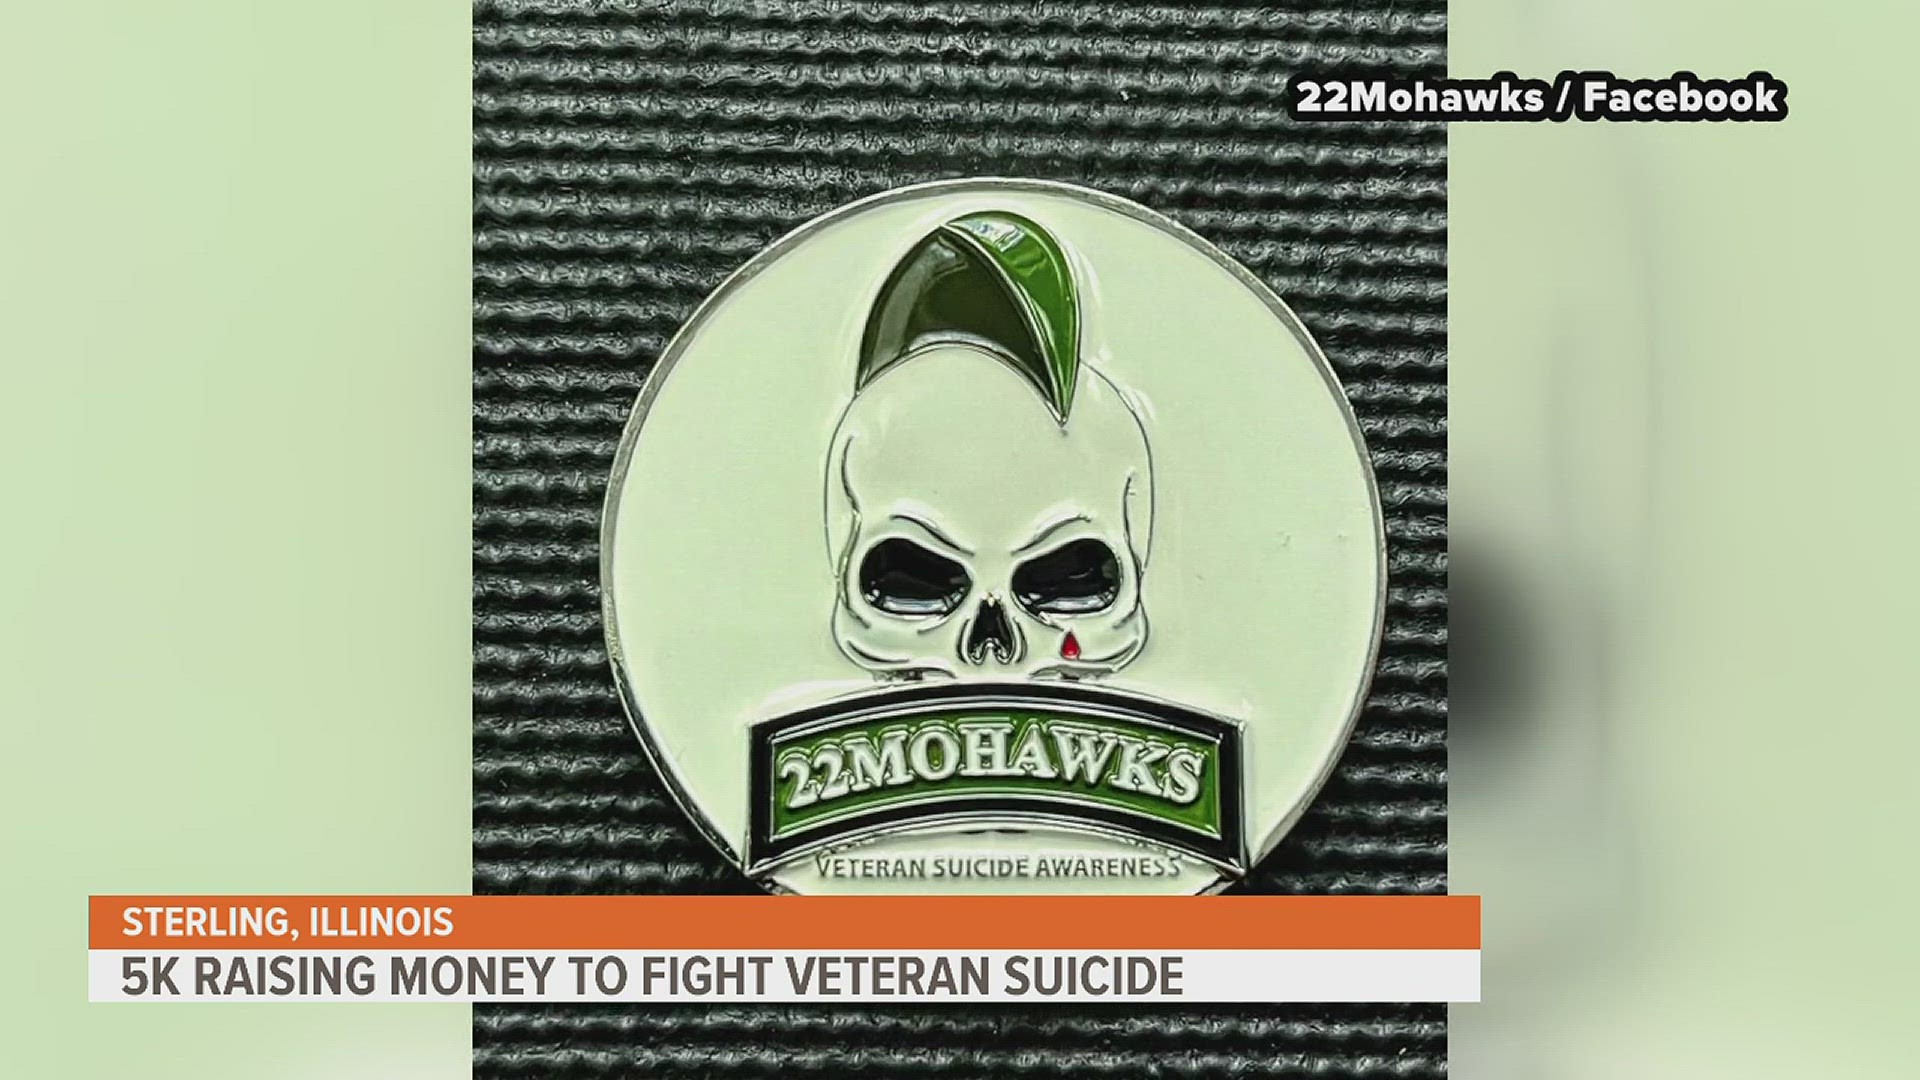 It's the first event for 22Mohawks Illinois, and they are hoping for a big turnout to make a greater impact on veterans' lives in the region.